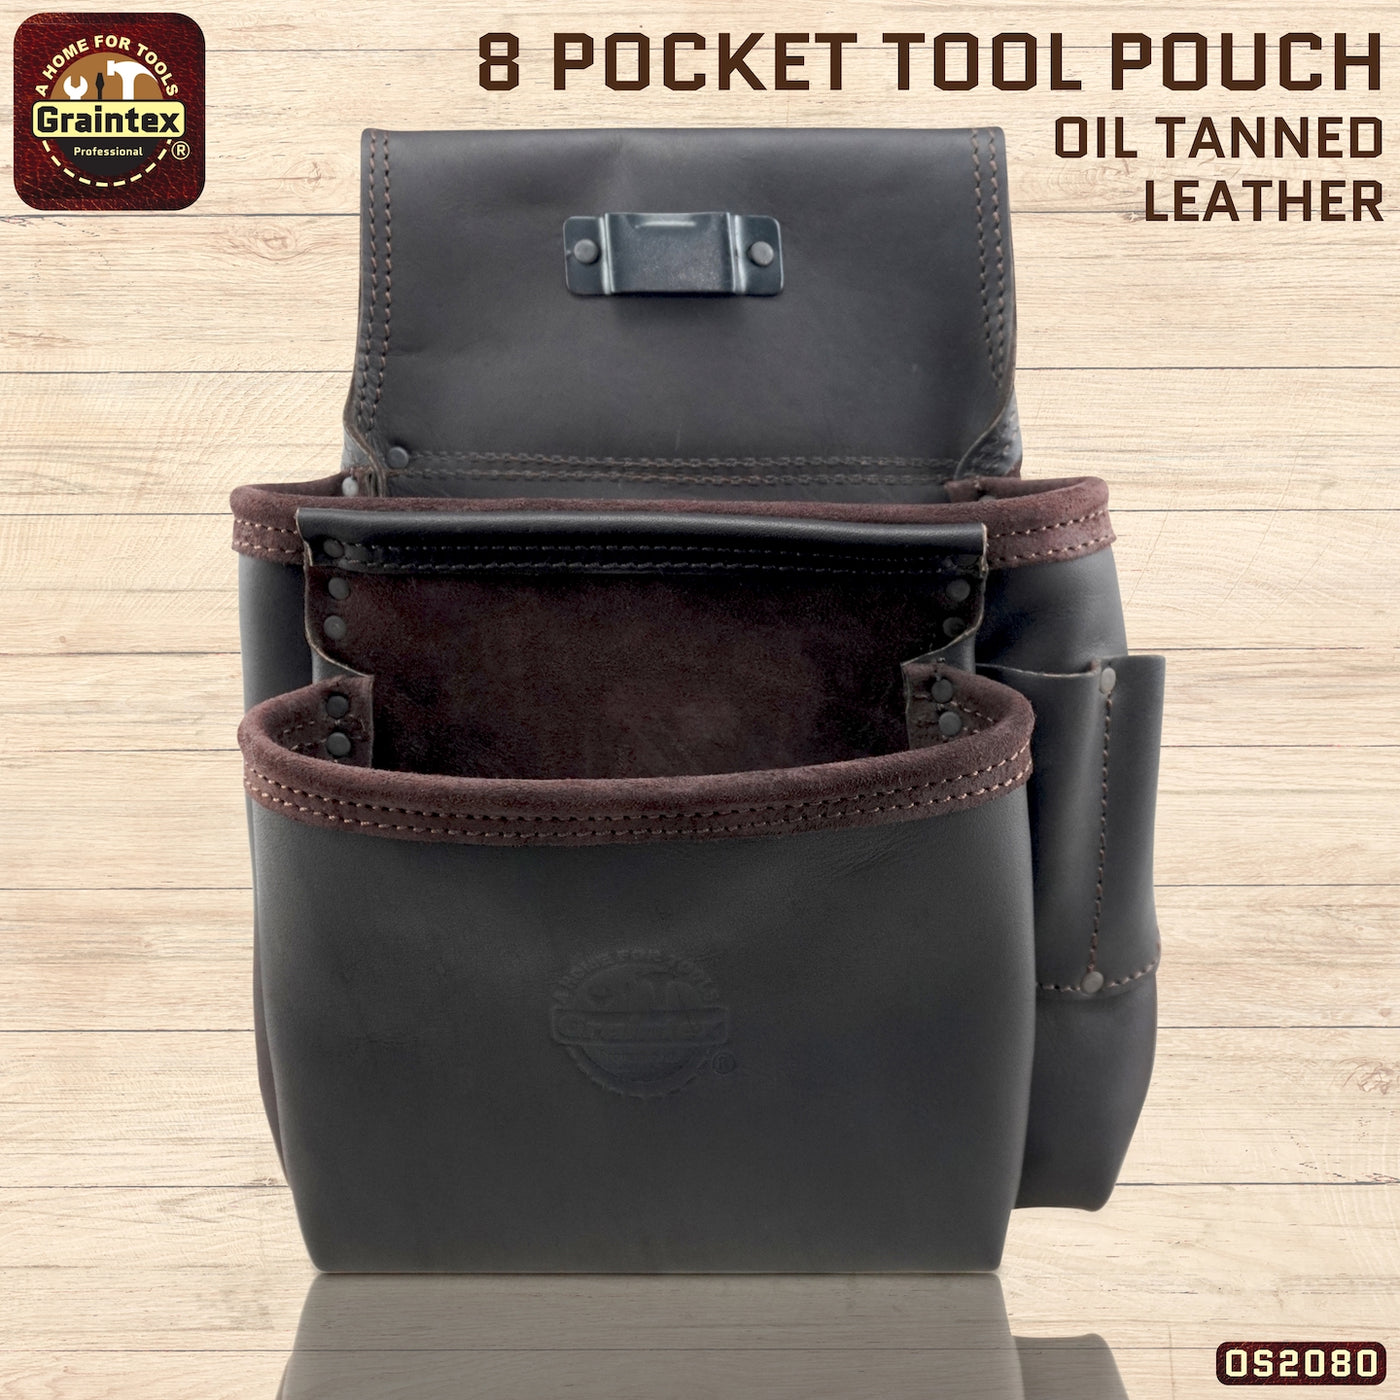 OS2080 :: 8 Pocket Framer’s Nail & Tool Pouch Black Color Oil Tanned Top Grain Leather Leather